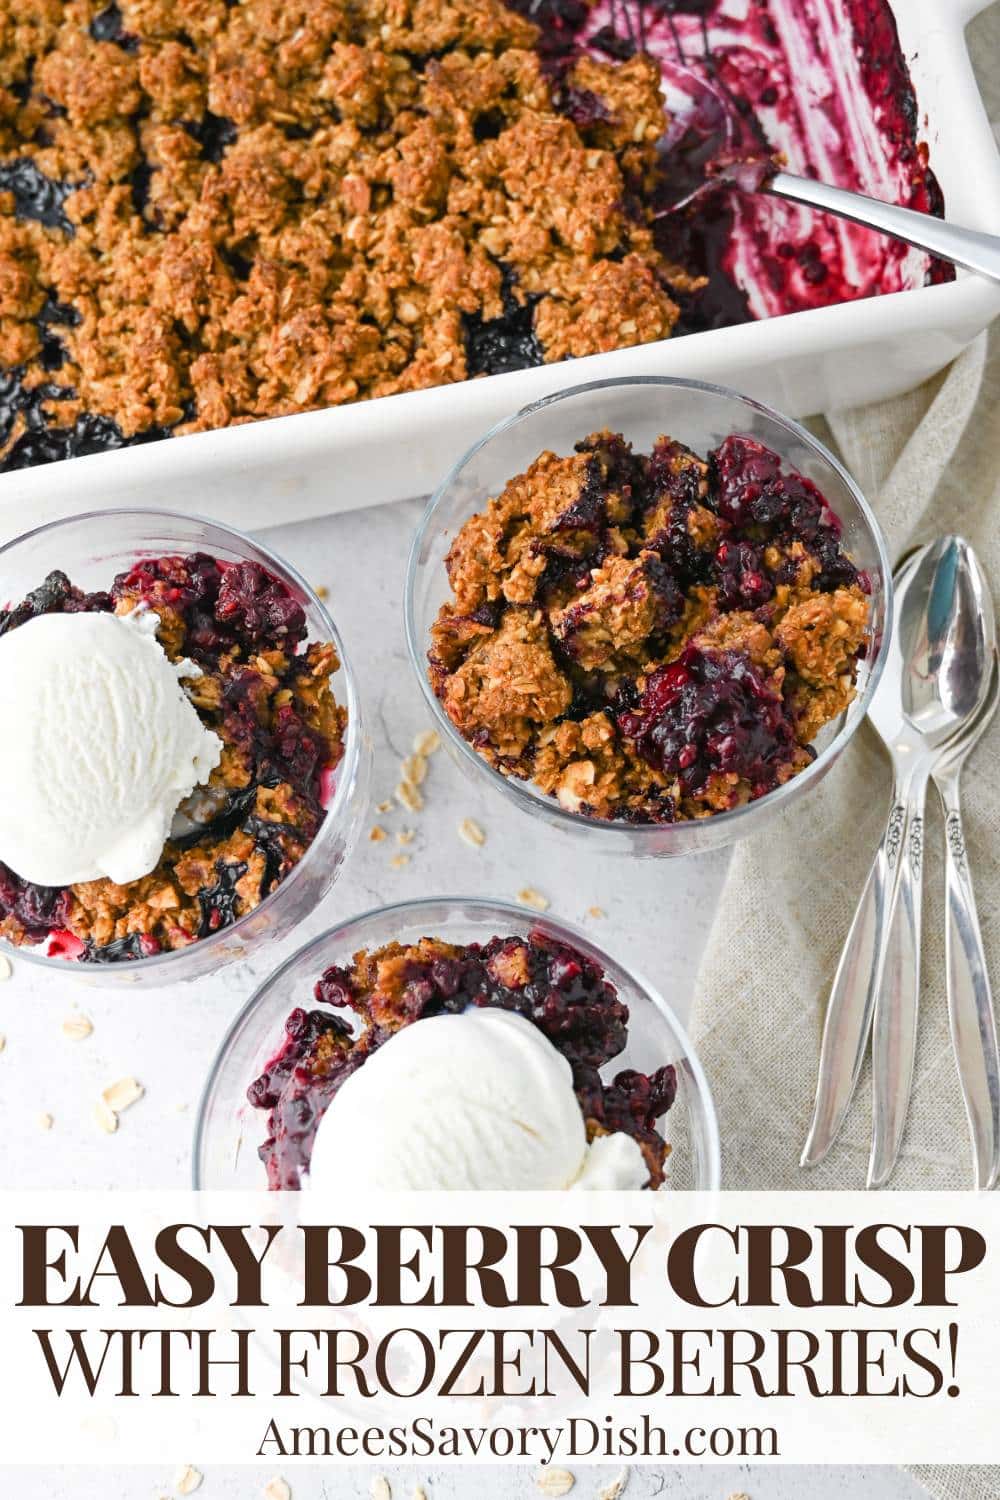 This easy berry crisp is a baked fruit dessert, using a blend of frozen blueberries, blackberries and raspberries with a tasty crumbled oat topping. via @Ameessavorydish